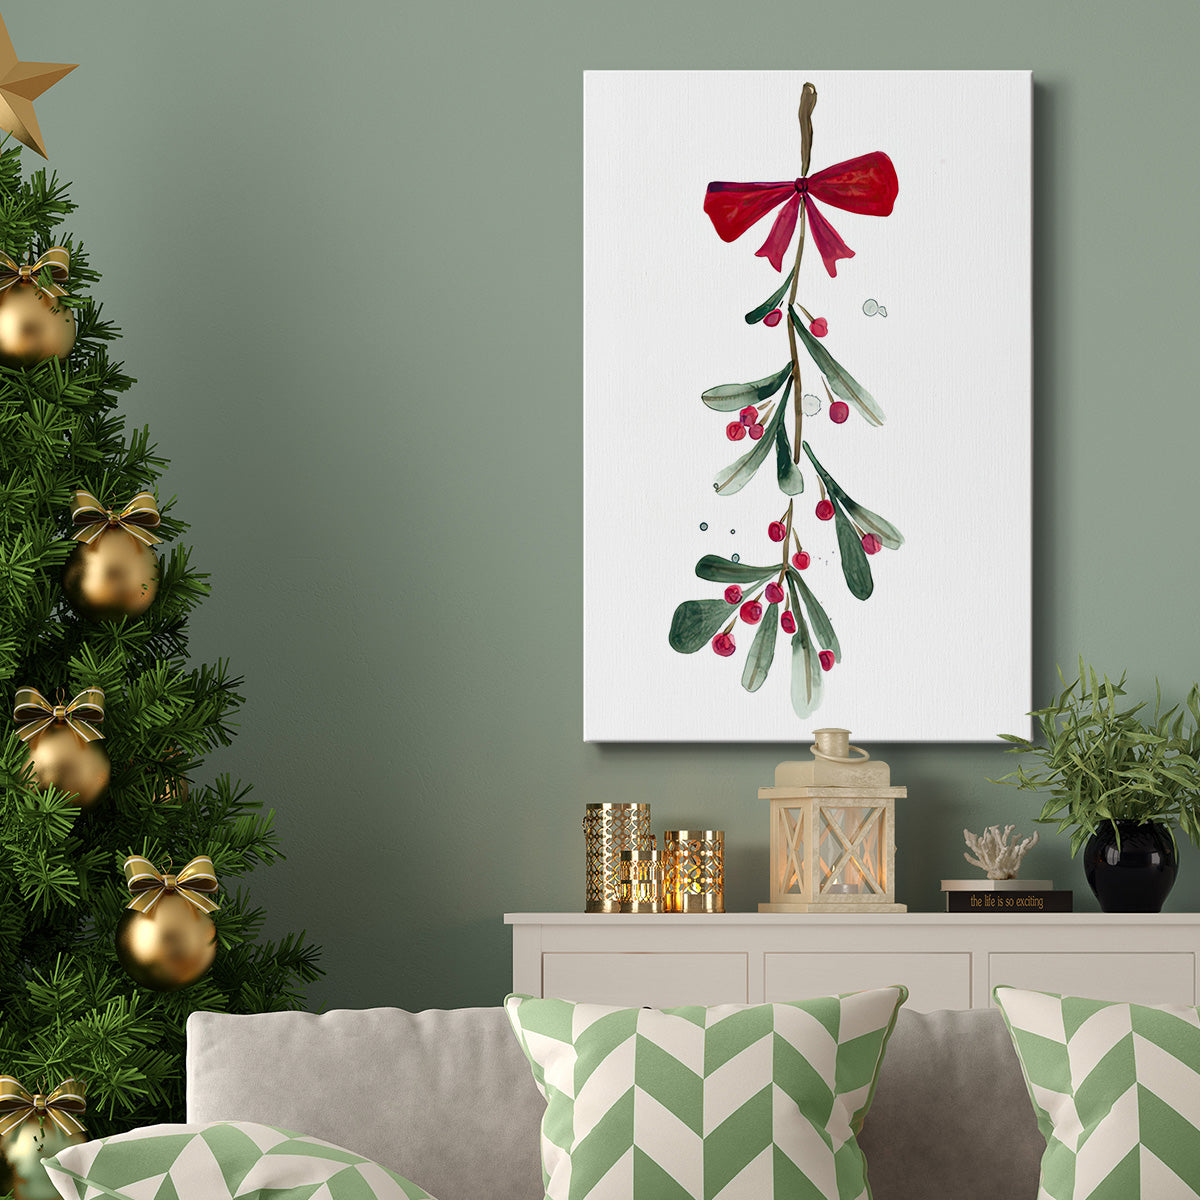 Warm Winter Wishes VI - Gallery Wrapped Canvas